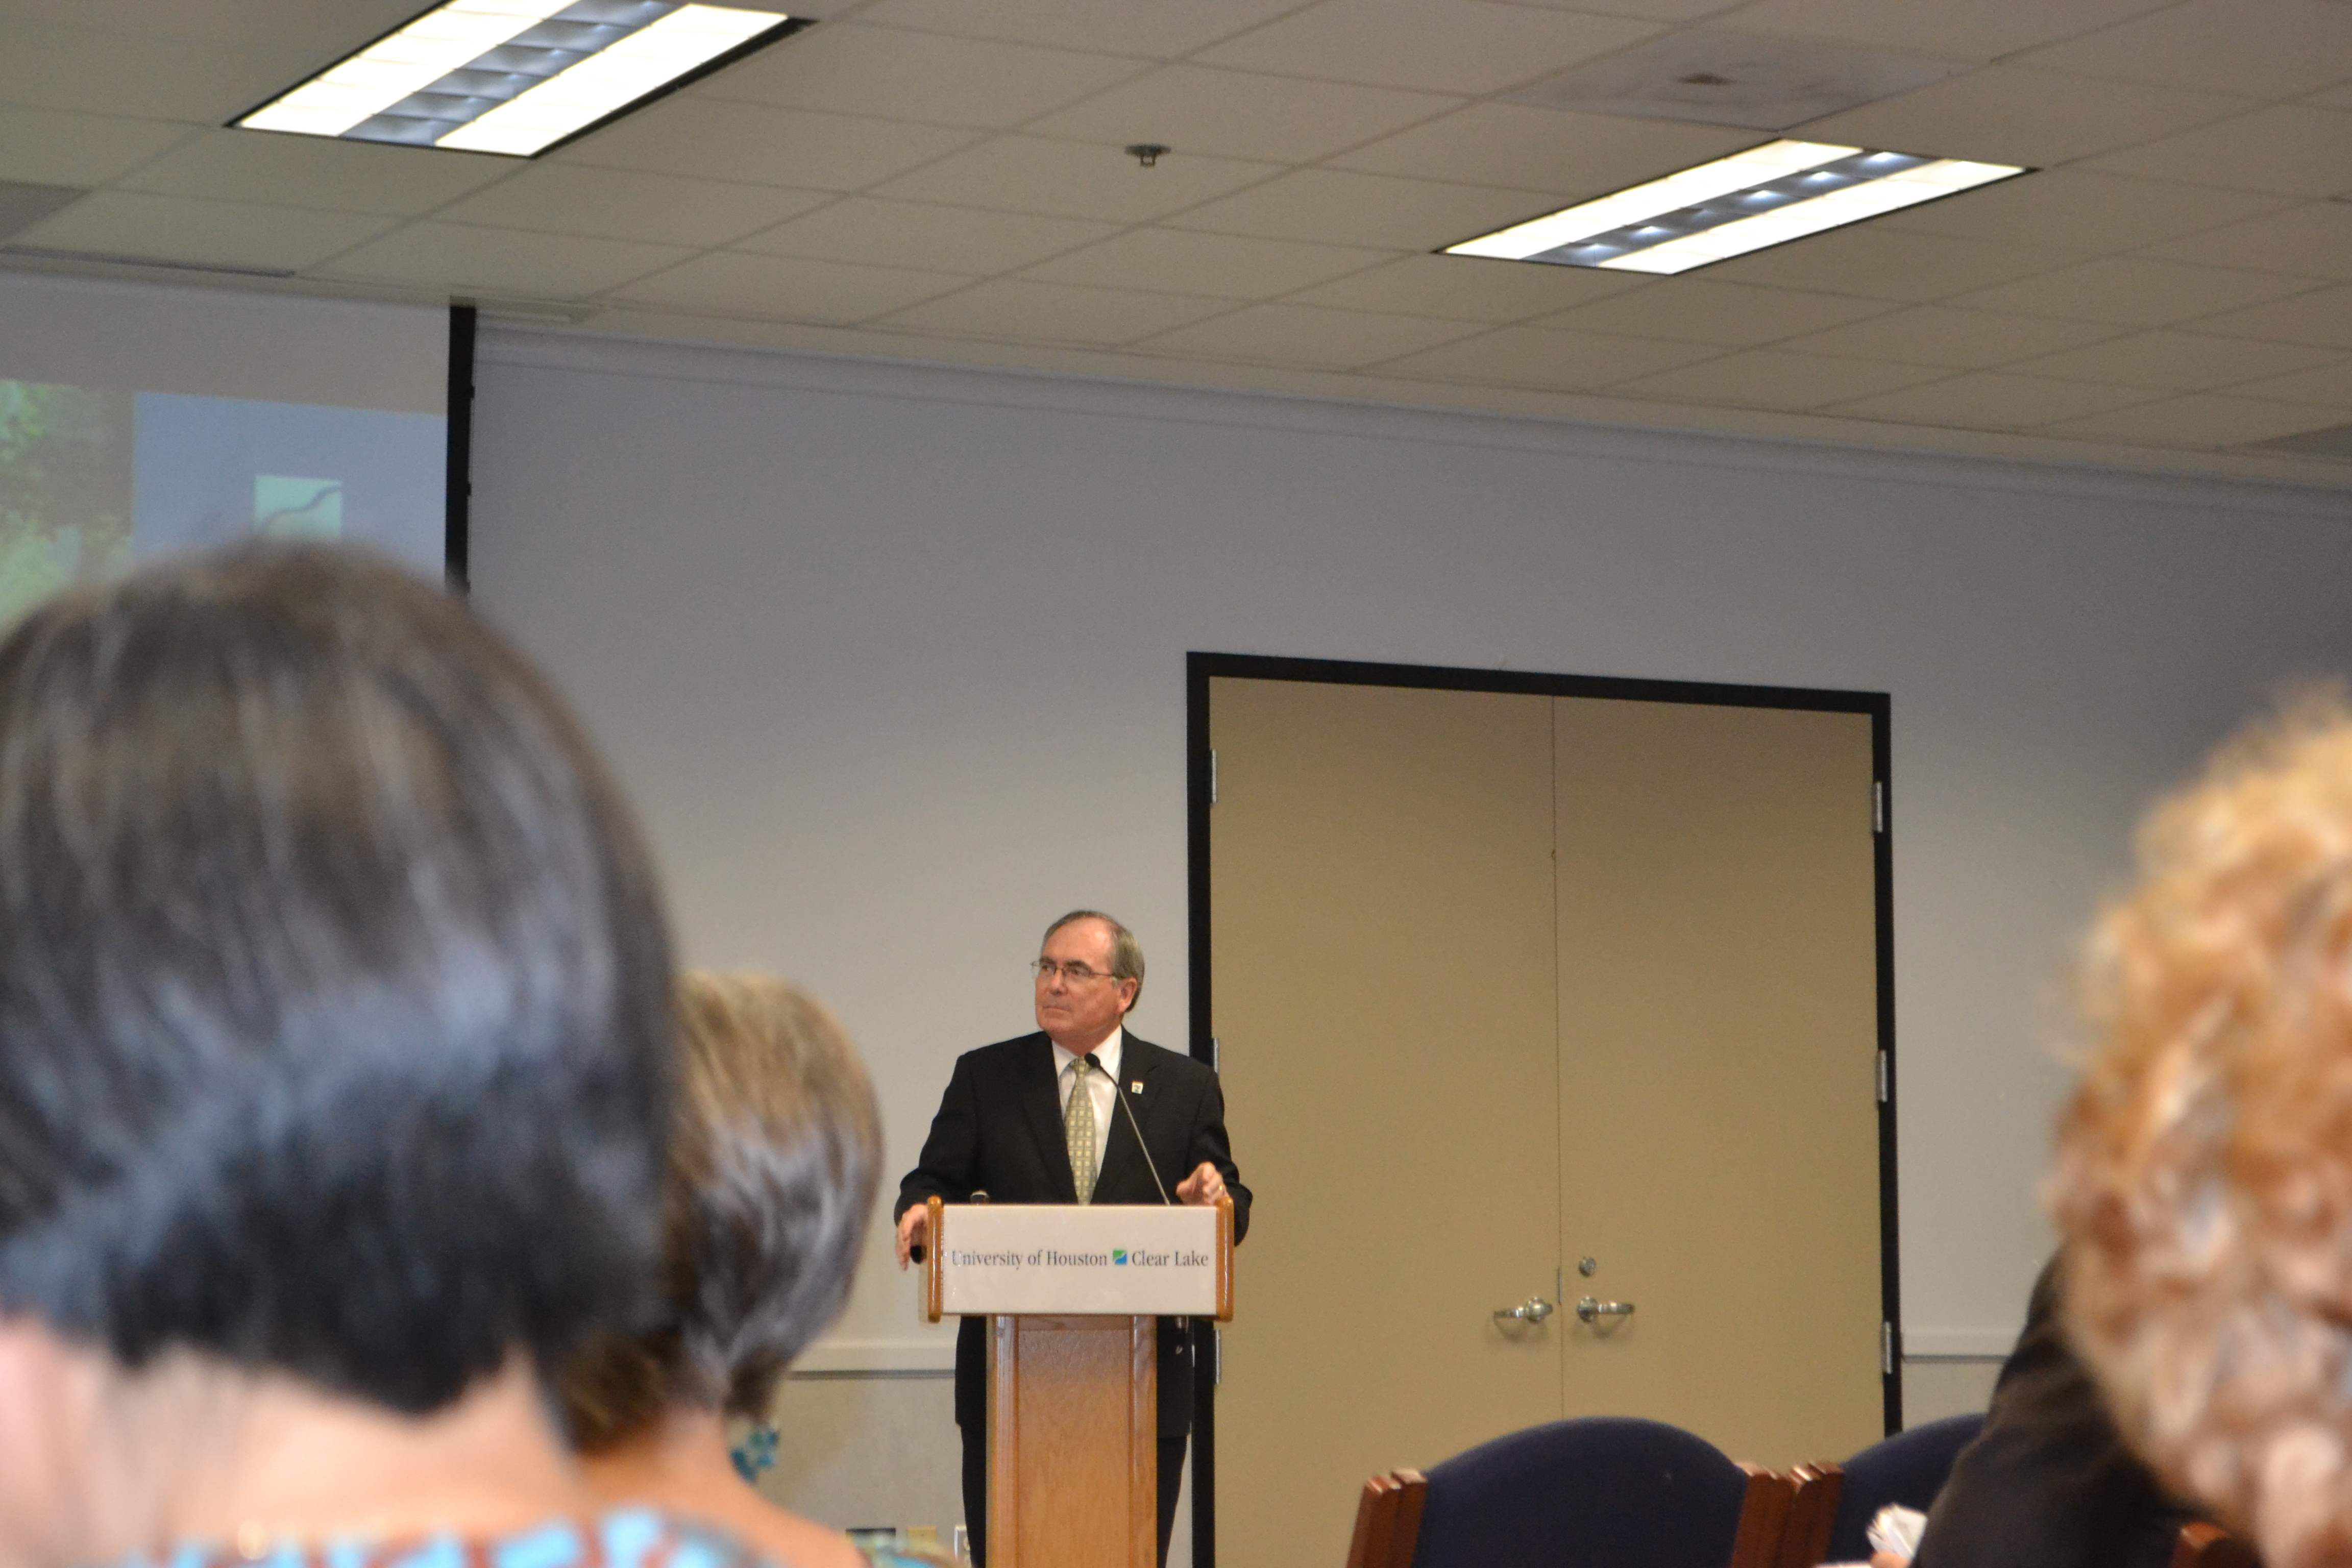 Photo: President Staples speaking at the campus-wide meeting held Sept. 15, 2016 in the Garden Room at UHCL. Photo by The Signal Reporter, Kate Gaddis.